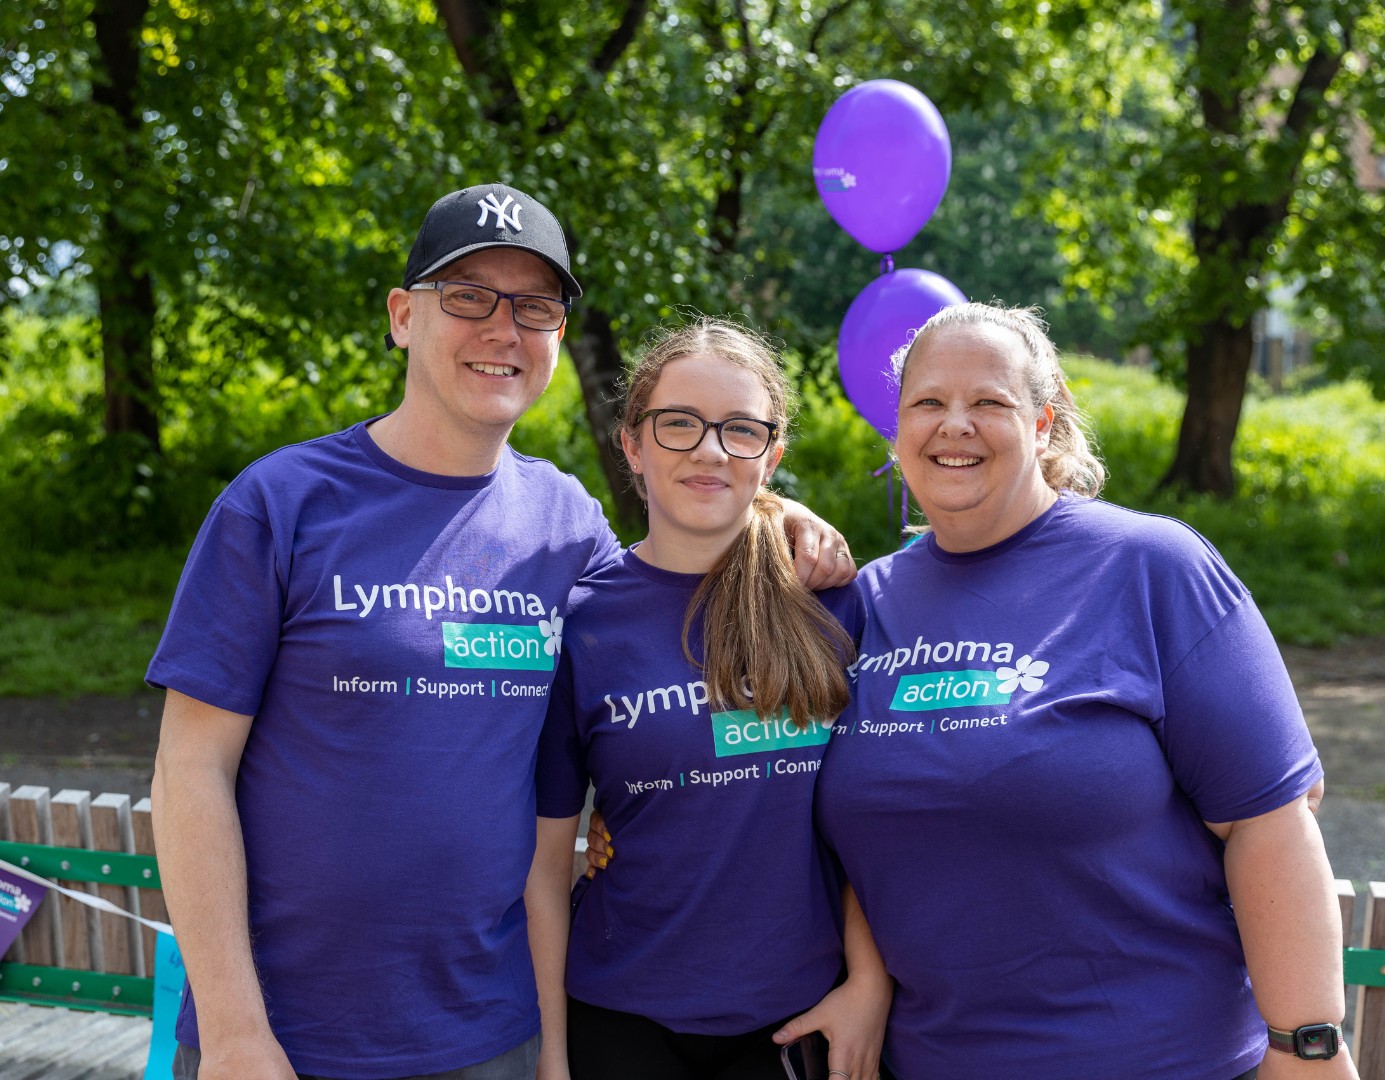 Jamie and family at Bridges of London event wearing Lymphoma Action t shirts